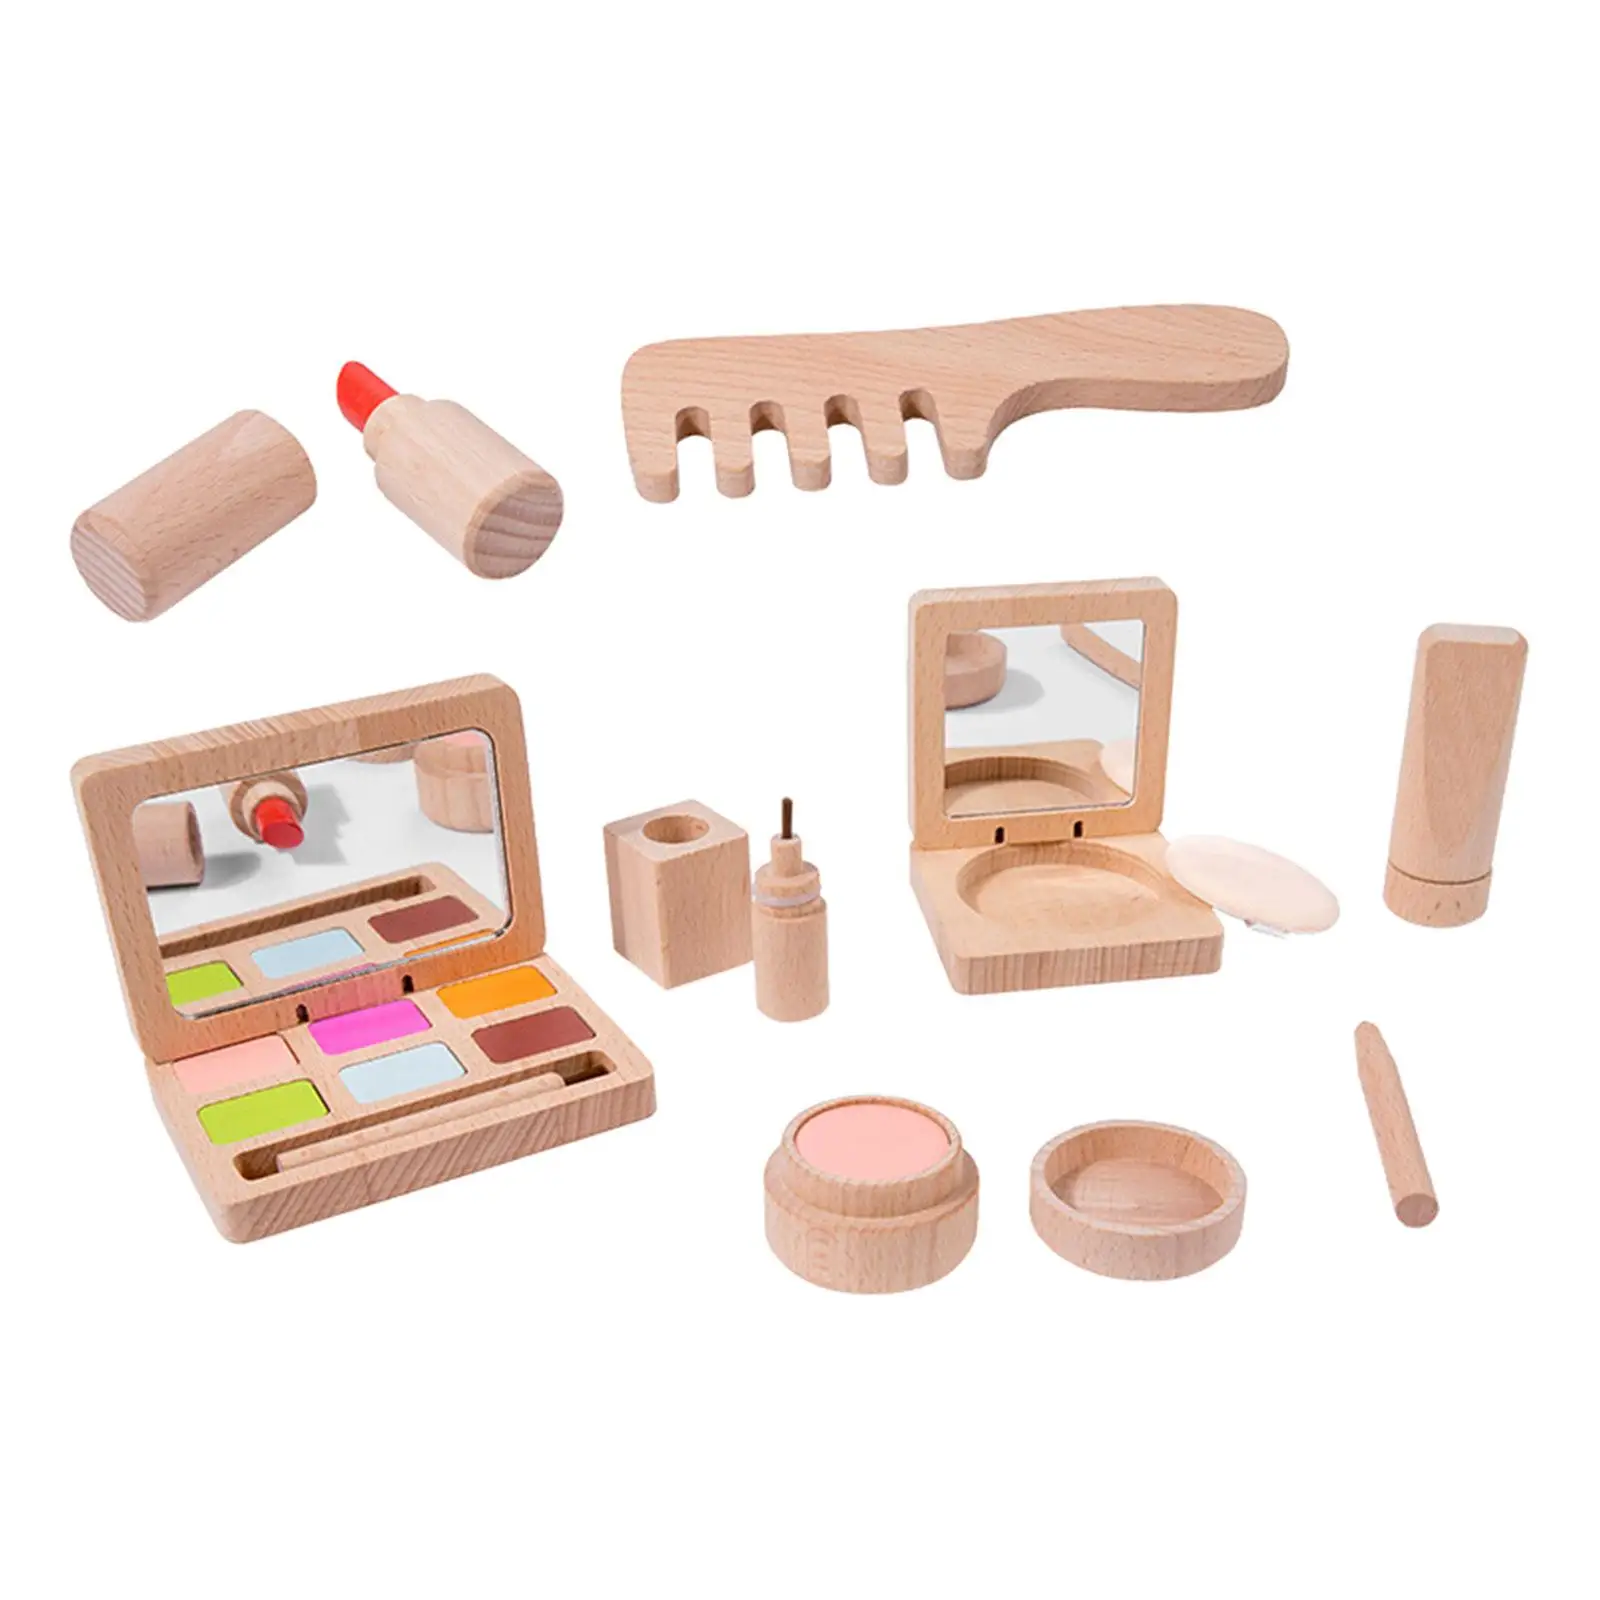 Makeup Toy Kits for Girls Role Playing Cosmetic Toy Kits Wooden Makeup Toys for Princess Dress up Birthday Toys Gift Age 3 4 5+